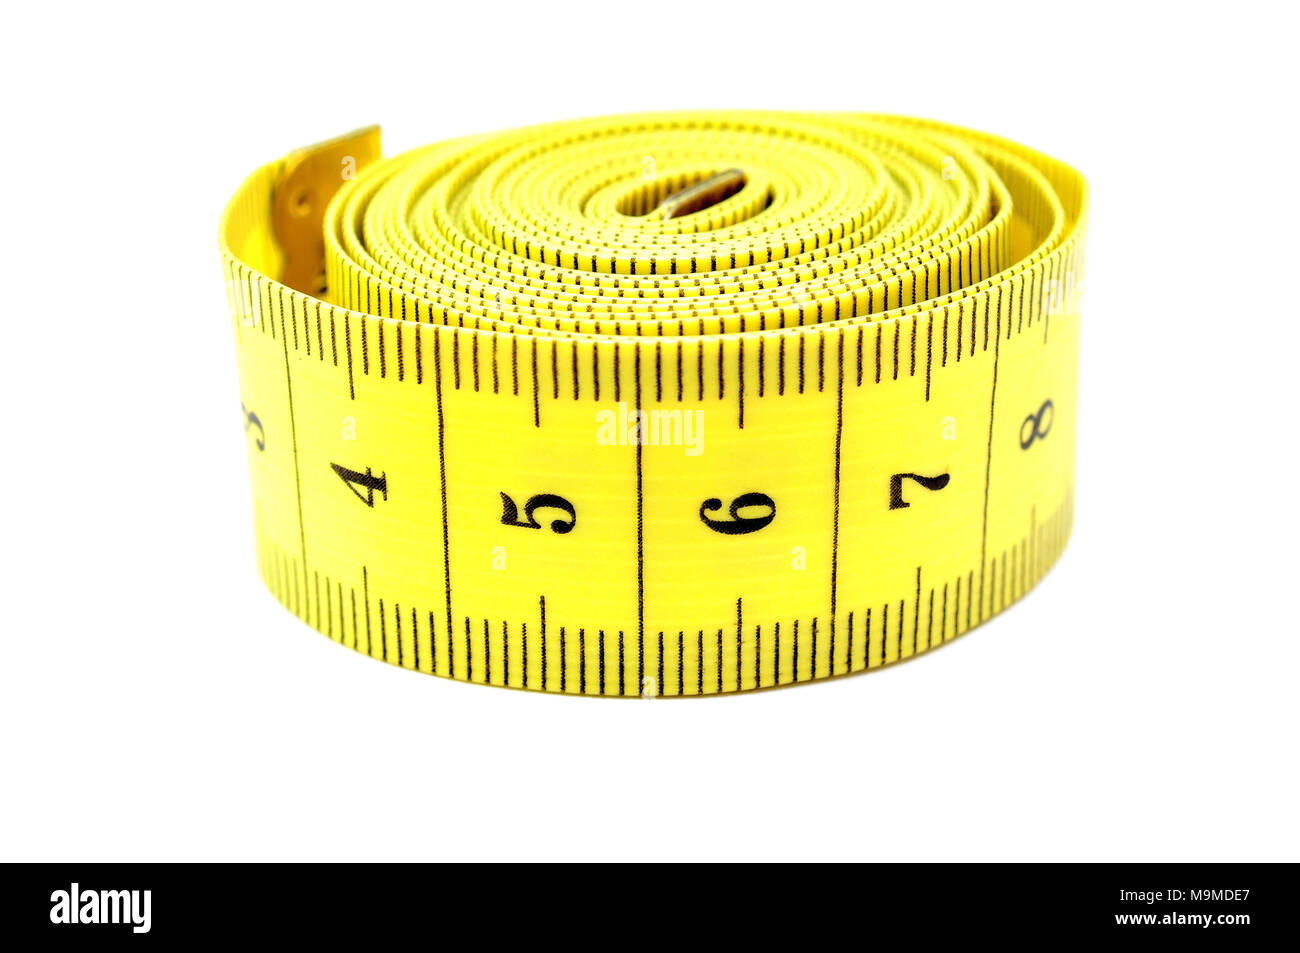 https://c8.alamy.com/comp/M9MDE7/measuring-tape-on-a-white-background-M9MDE7.jpg